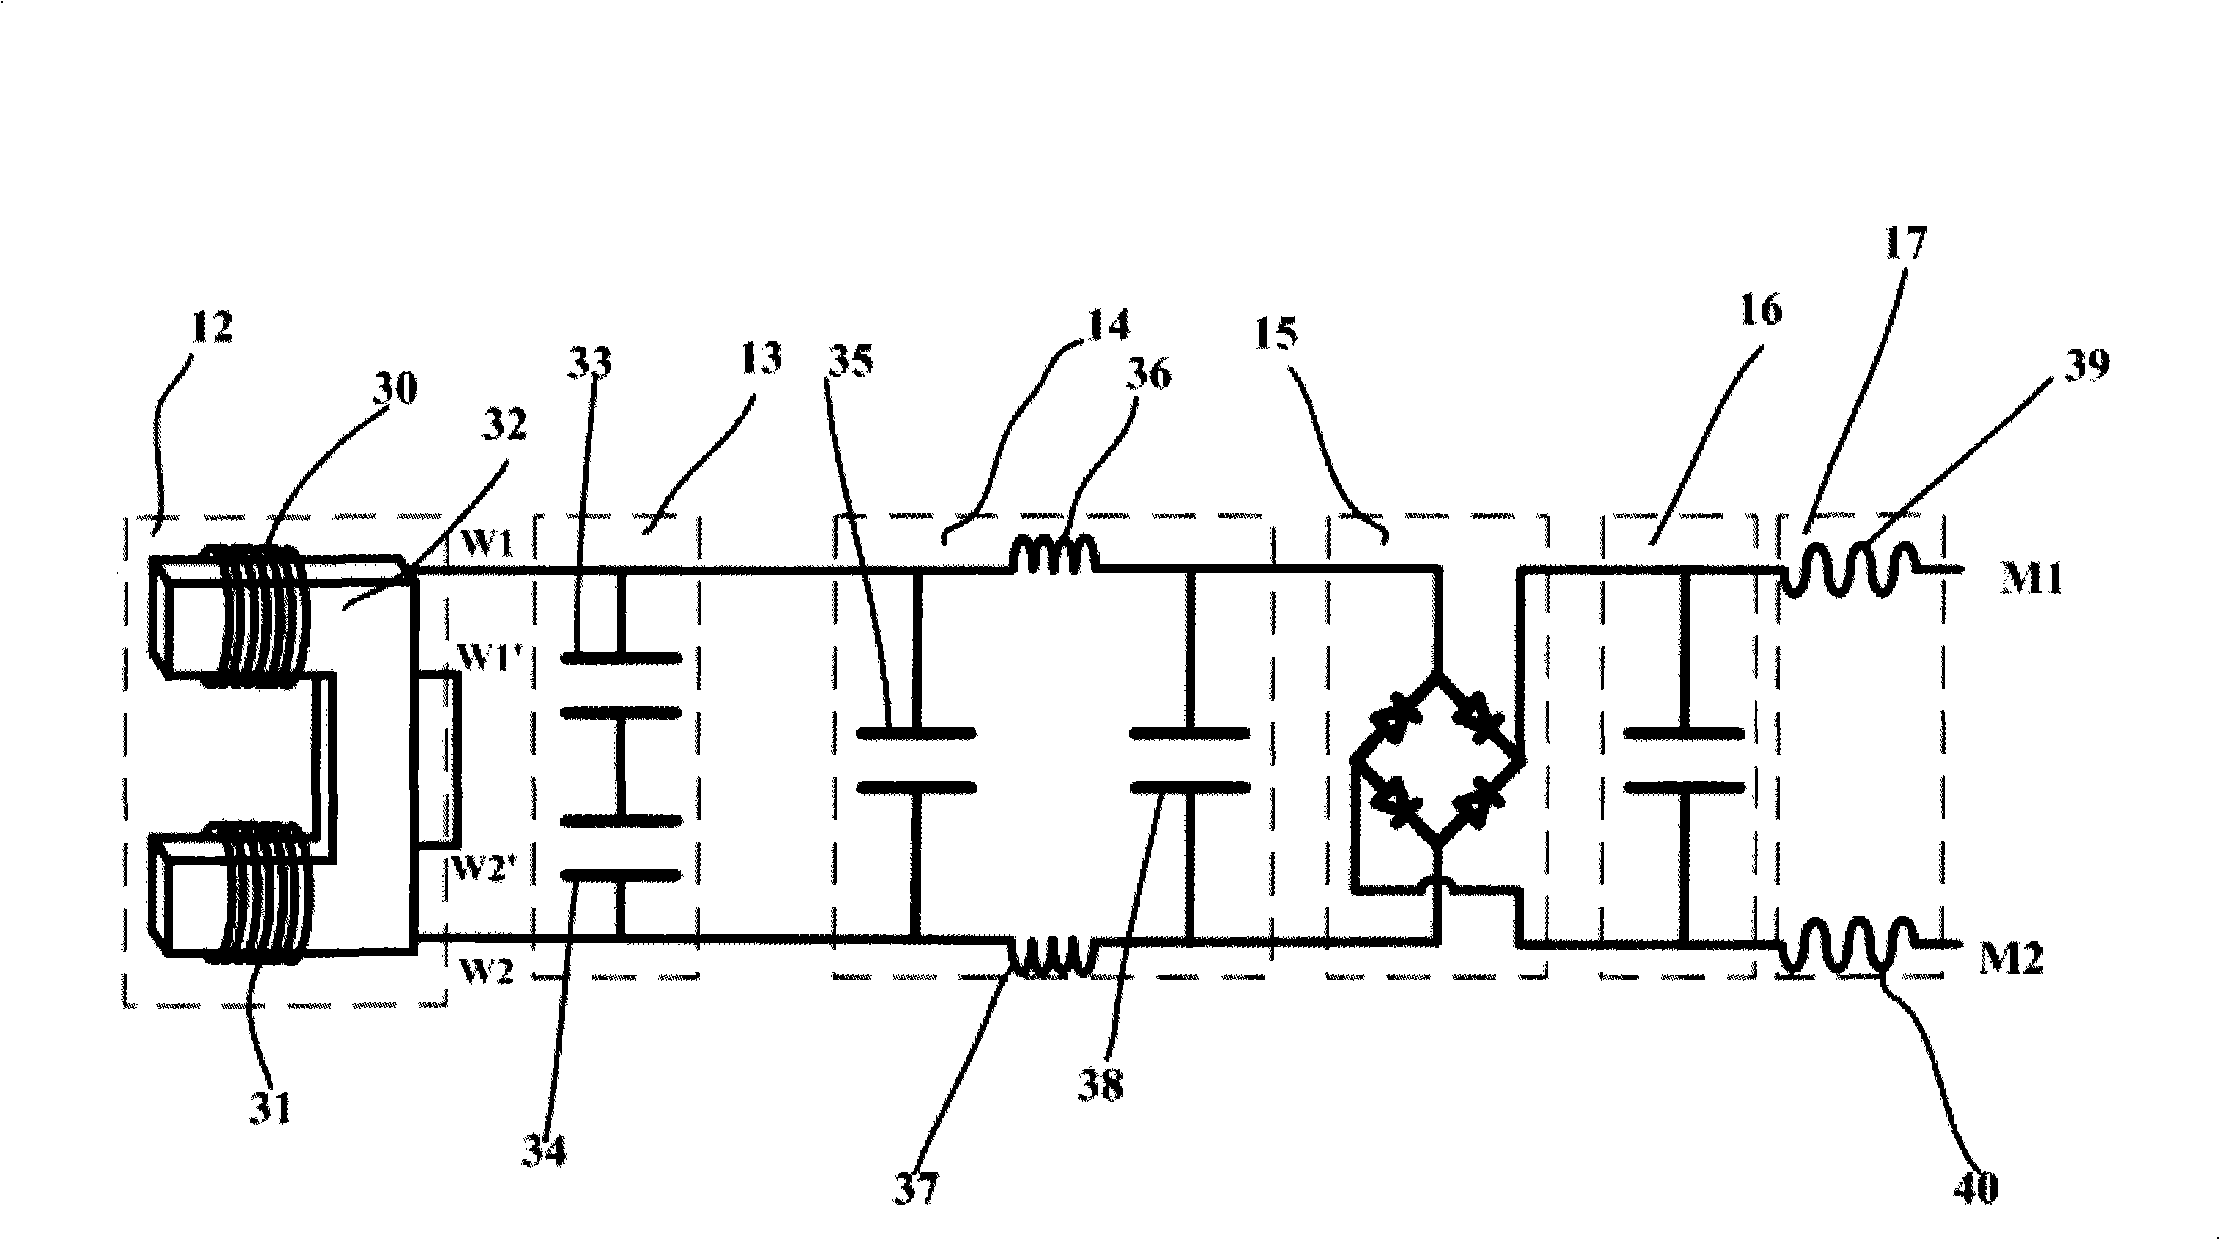 Non-contact power supply of automatic carriage